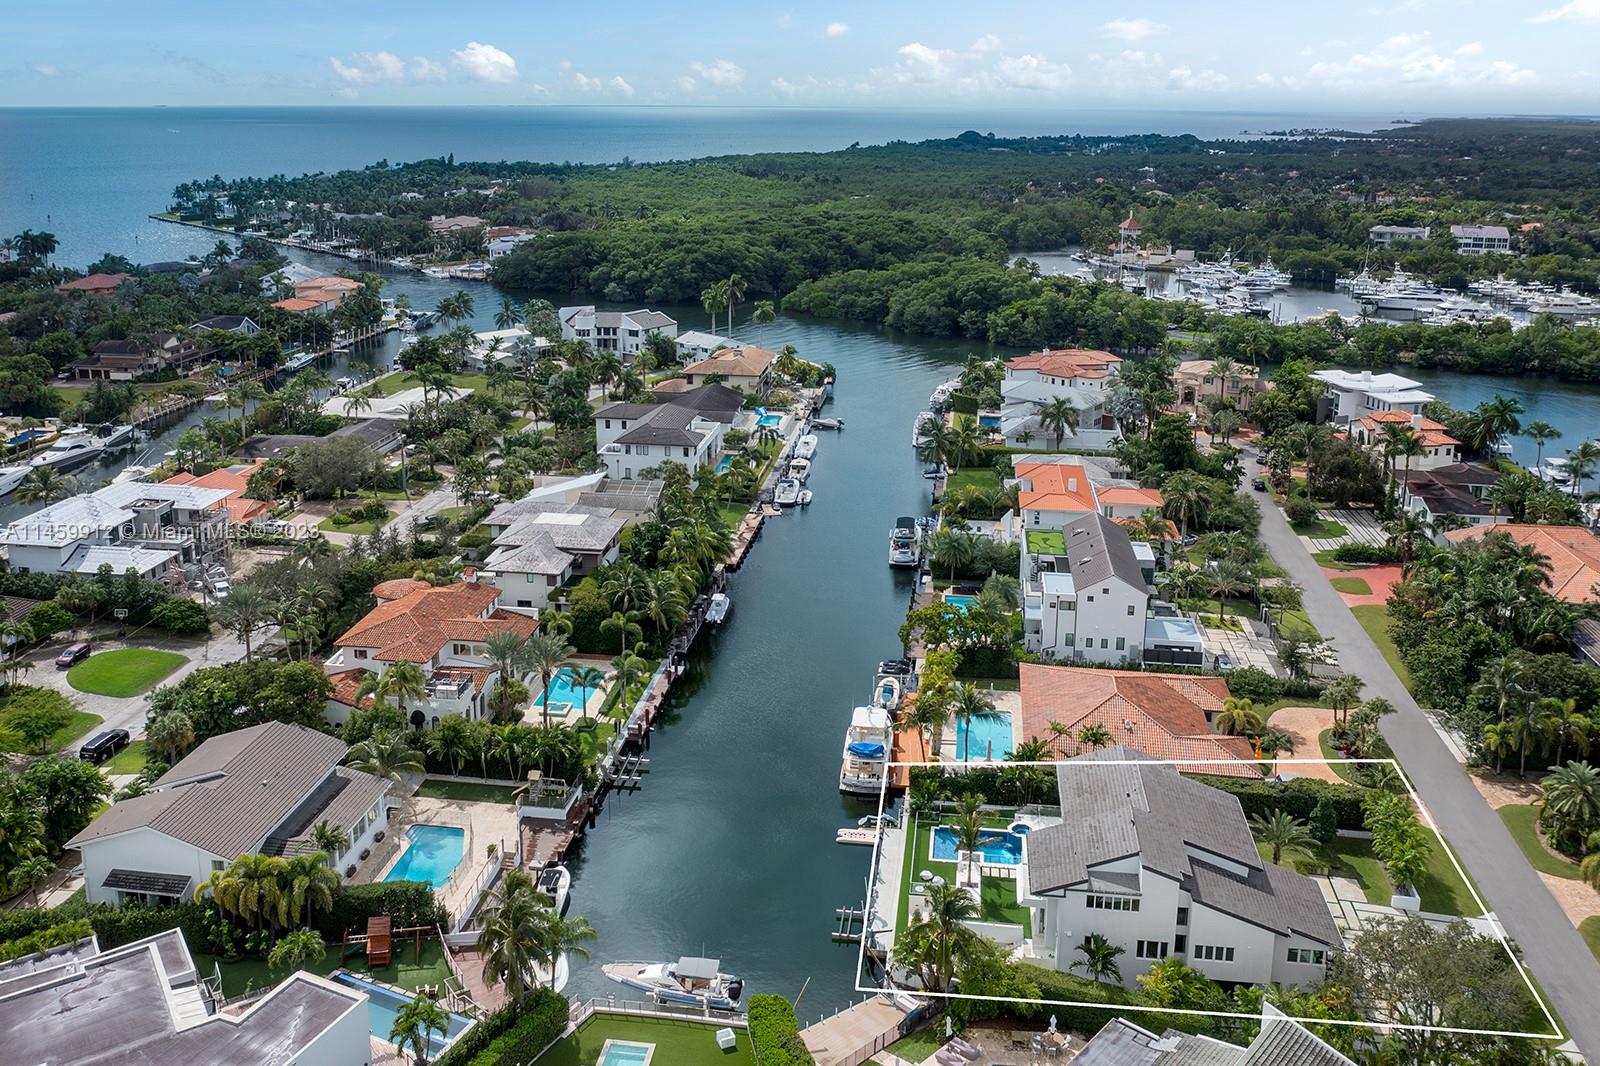 Located within the prestigious and highly sought-after gated community of Sunrise Harbor in Coral Gables, with 100 feet of oceanfront and a private dock providing direct access to Biscayne Bay, this luxurious and modern beachfront residence. The property also has a gym, a playground, and an office. Custom-designed closets and a generous laundry room provide ample storage space. The spacious gourmet kitchen, wine room, and glass bar add to the charm of this exquisite property. This prime location is just minutes from Coconut Grove, South Miami, top-rated schools, and Miami International Airport.